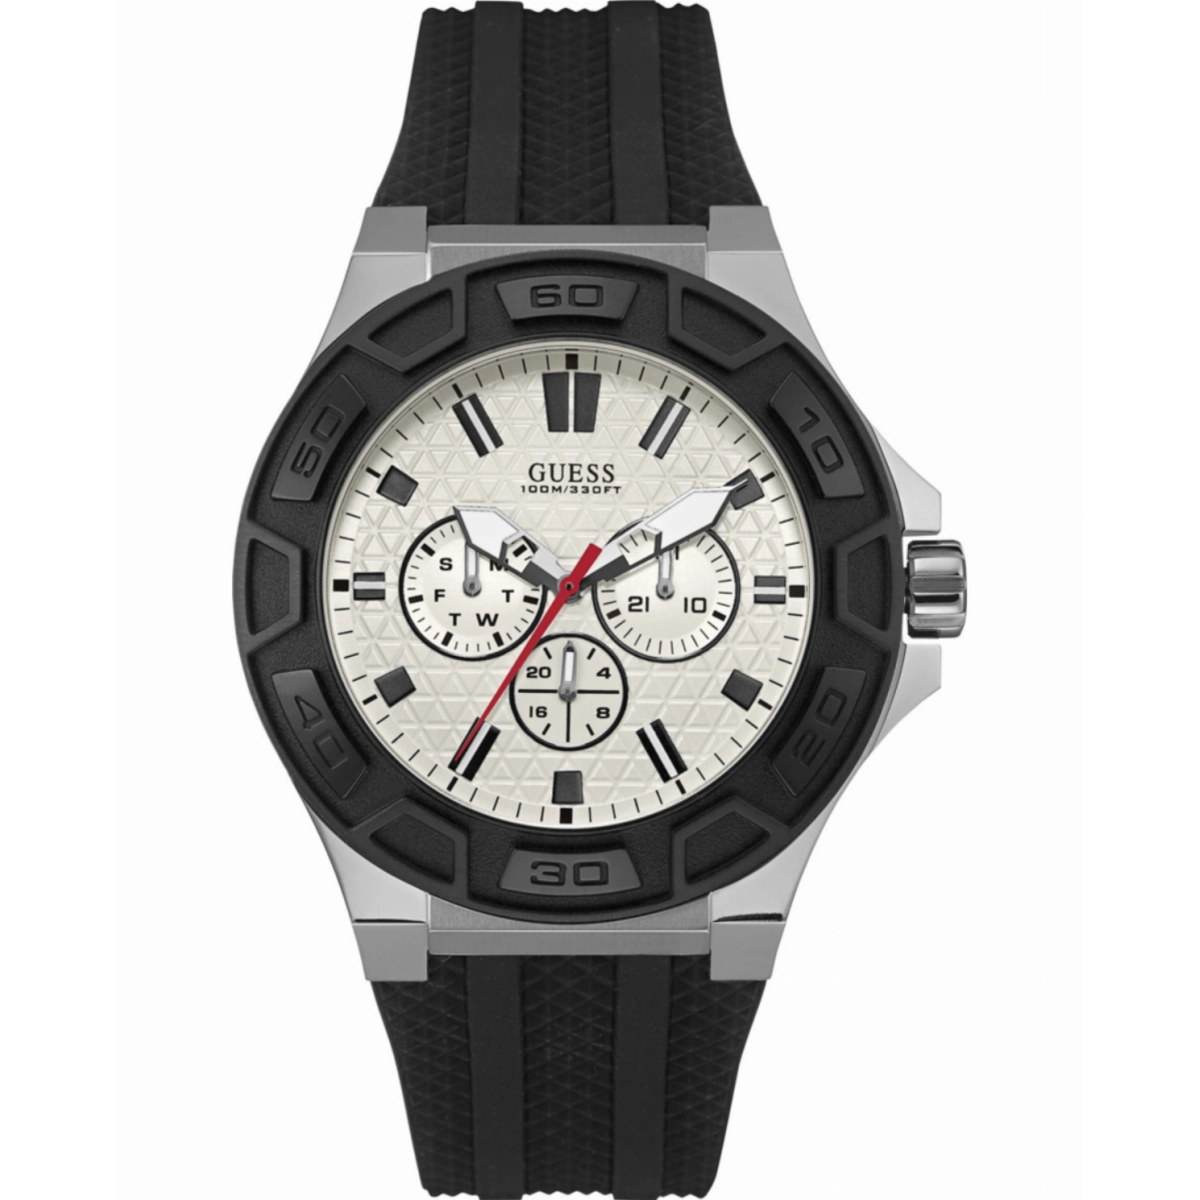 WATCH ANALOG MENS GUESS W0674G3